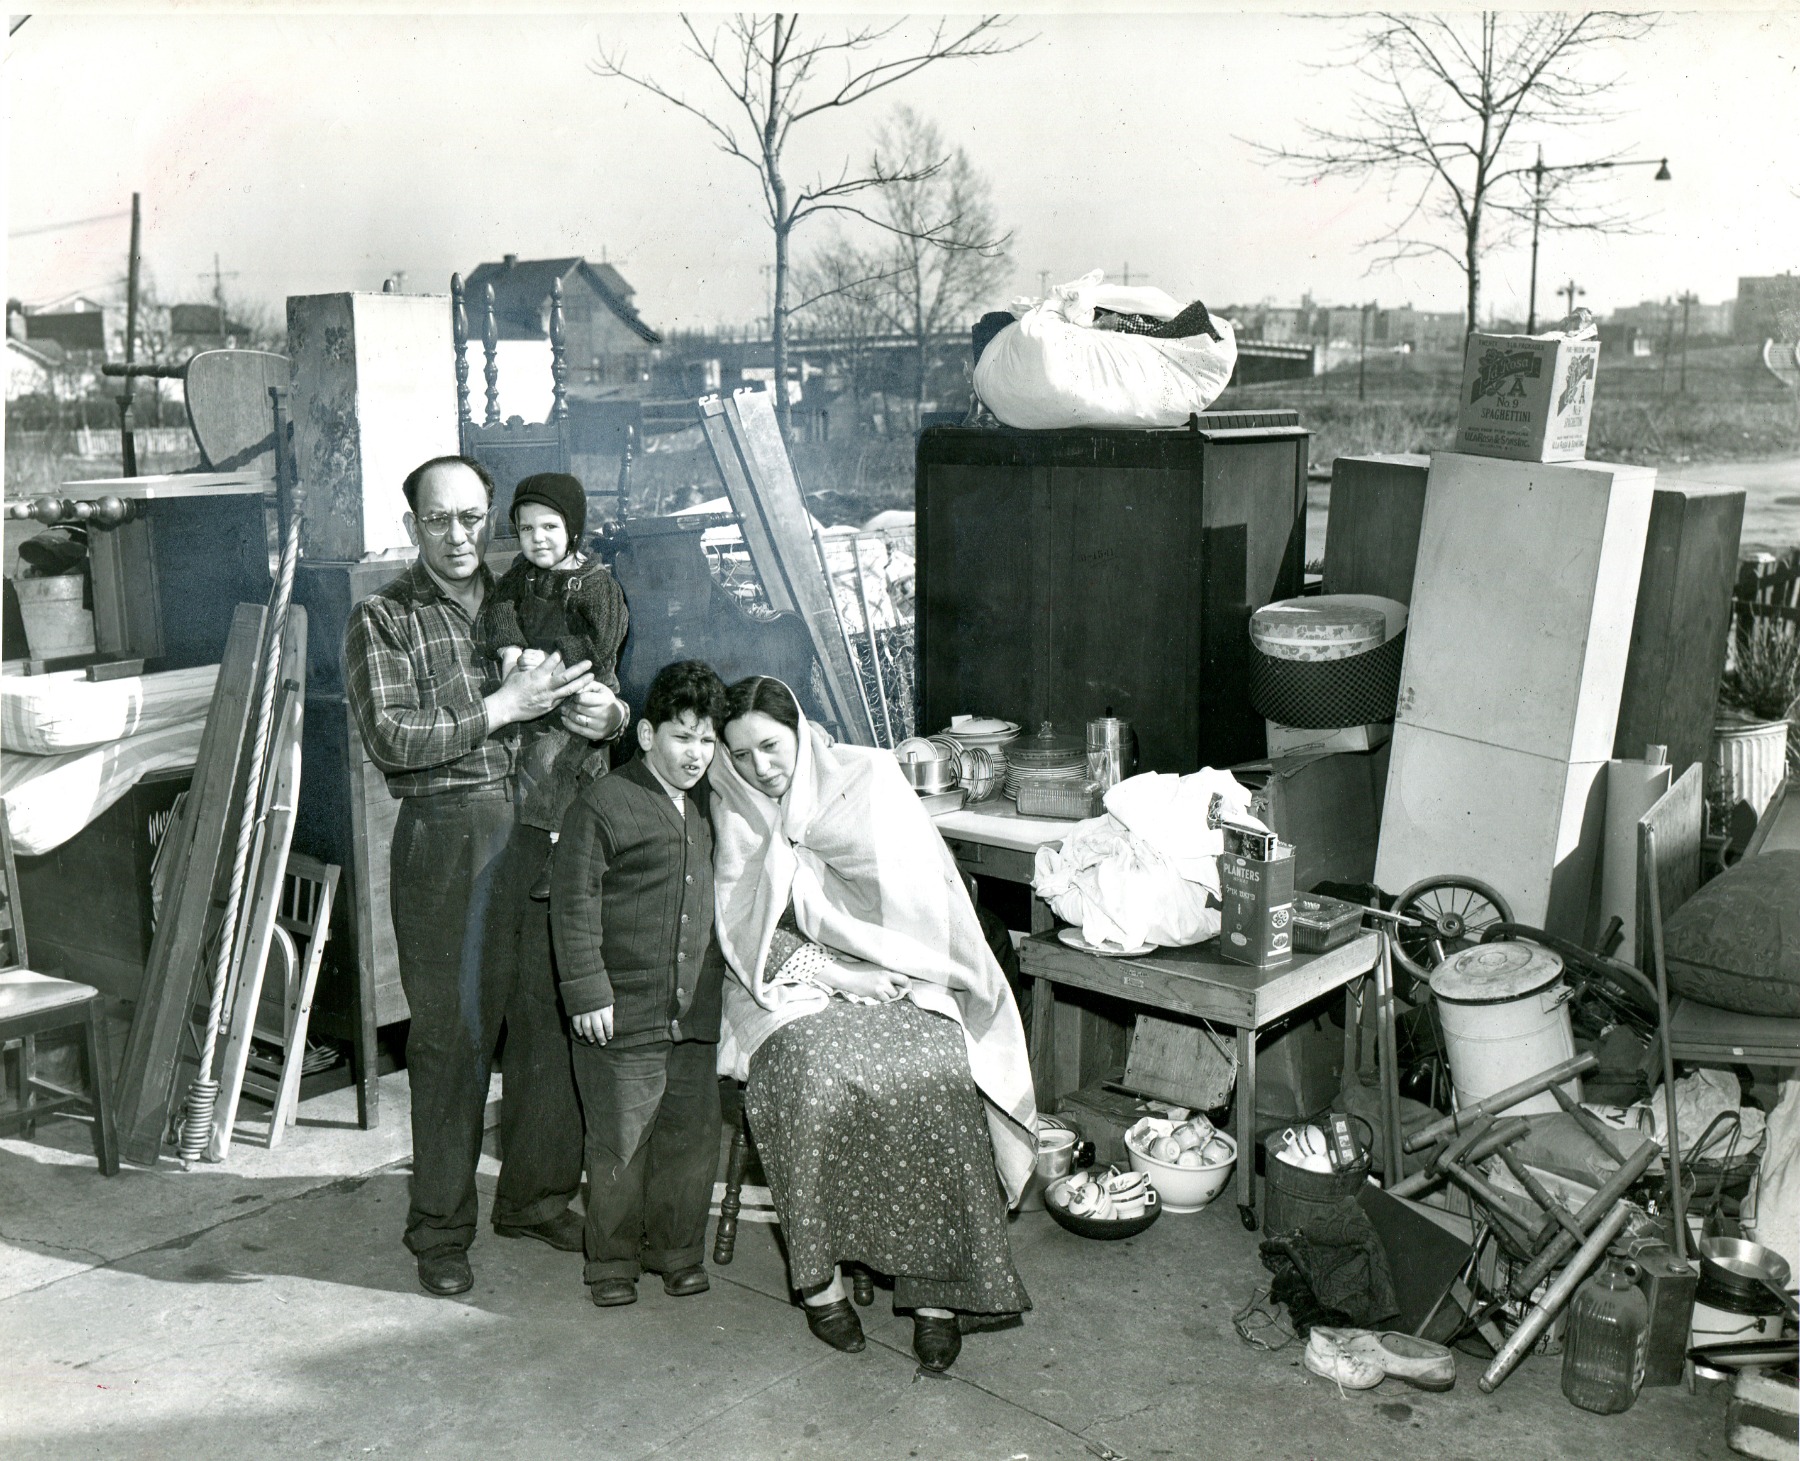 ON THE STREET...Irving Haberman's shot of an evicted family